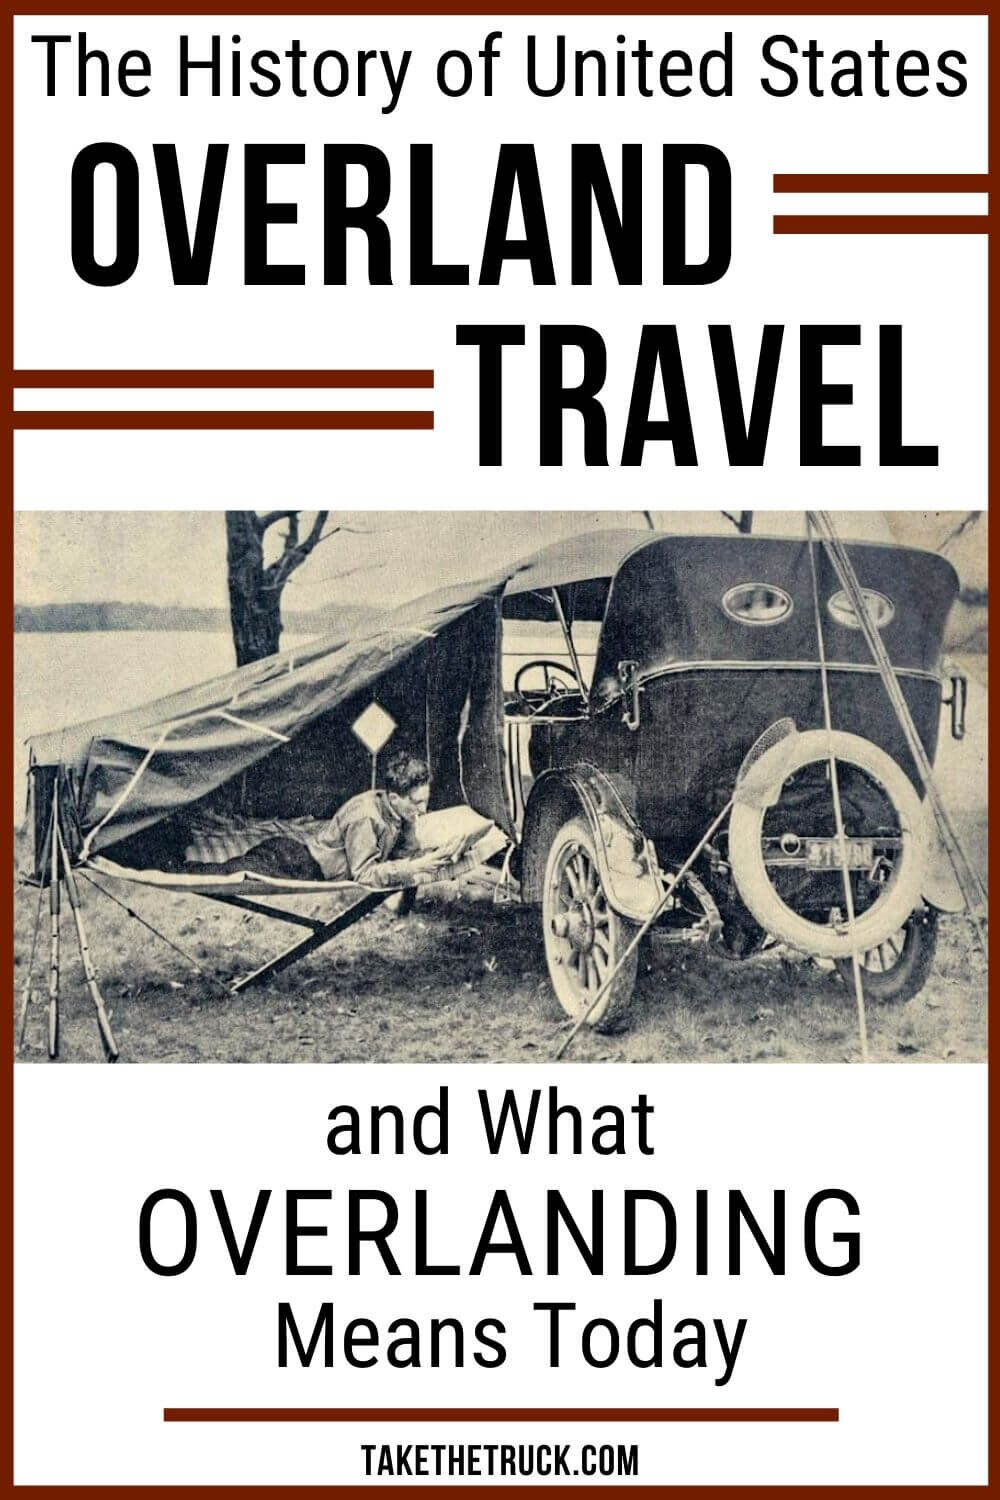 Fun and quick read all about the history of overlanding and overland travel in the U.S. Helps to answer the question, What is overlanding? and gives overlanding basics for beginners.